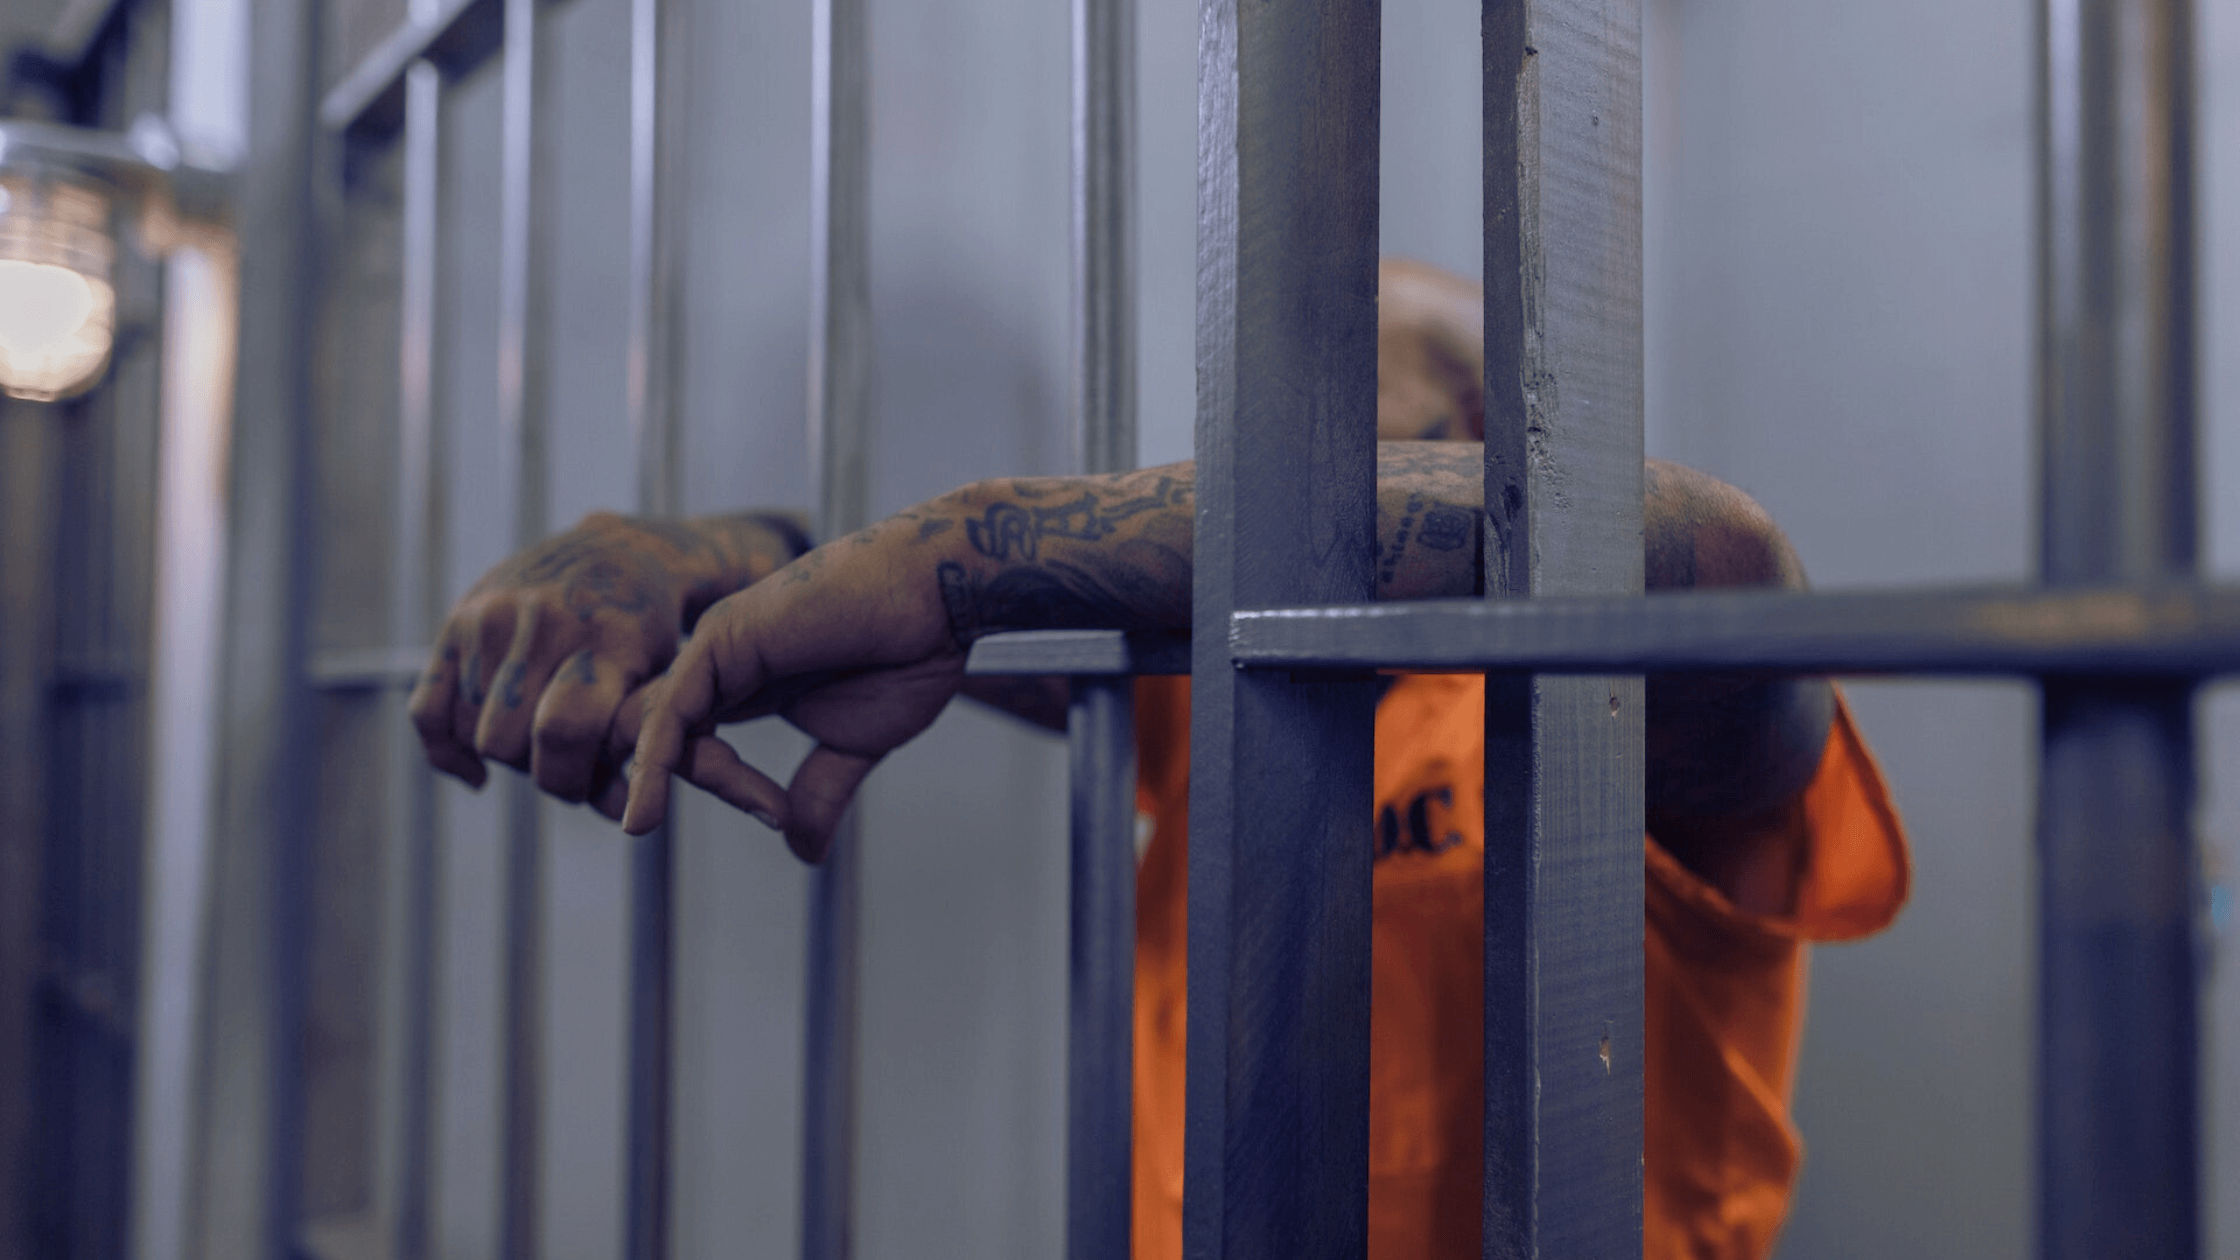 Inmate in orange jumpsuit gripping prison cell bars.